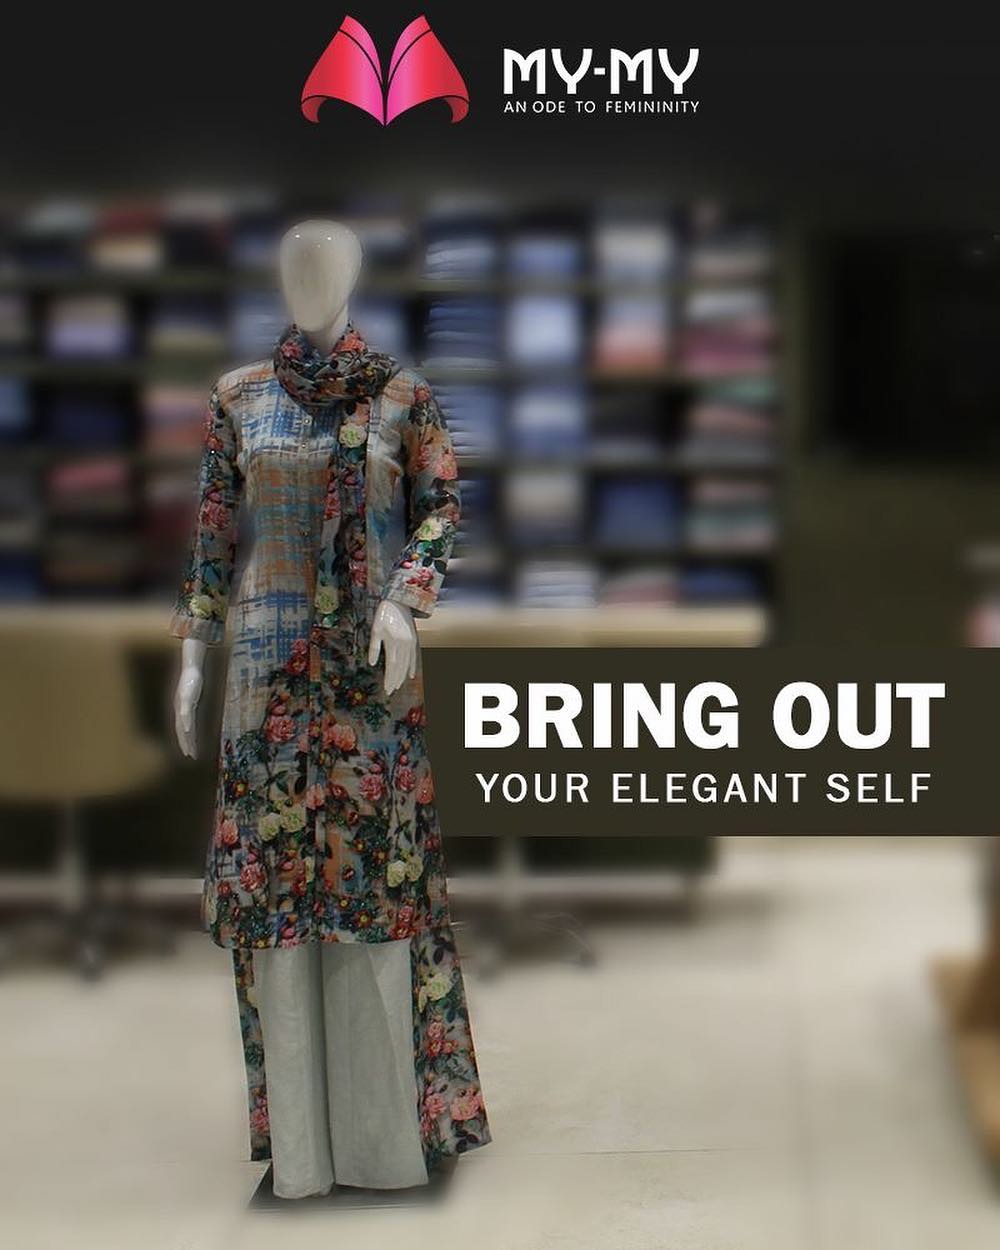 Share your unique self with the rest of the world as you wear this fabulous dresses

#MYMYSale #MyMy #MyMyAhmedabad #Fashion #Ahmedabad #FemaleFashion